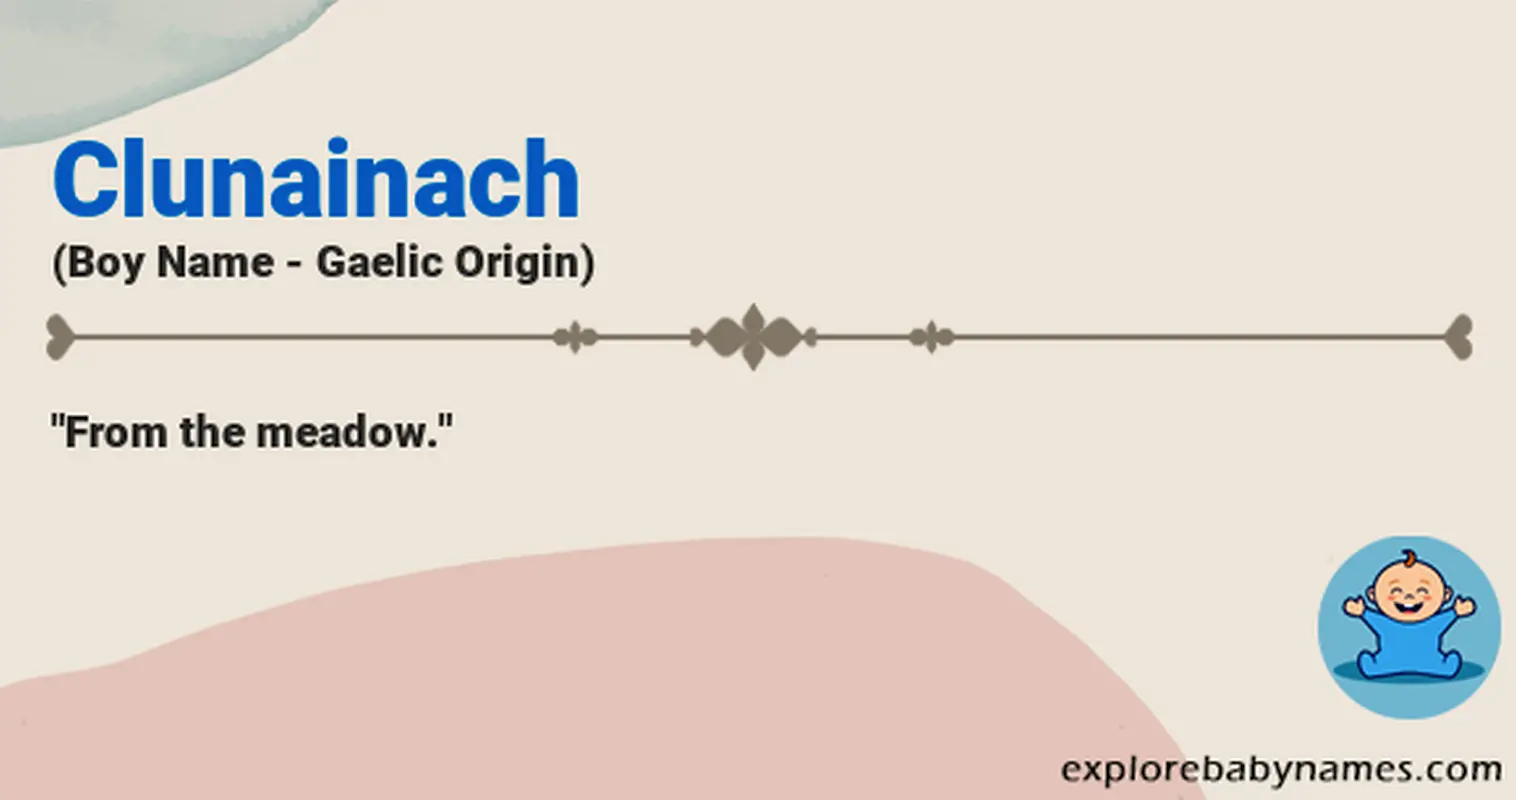 Meaning of Clunainach